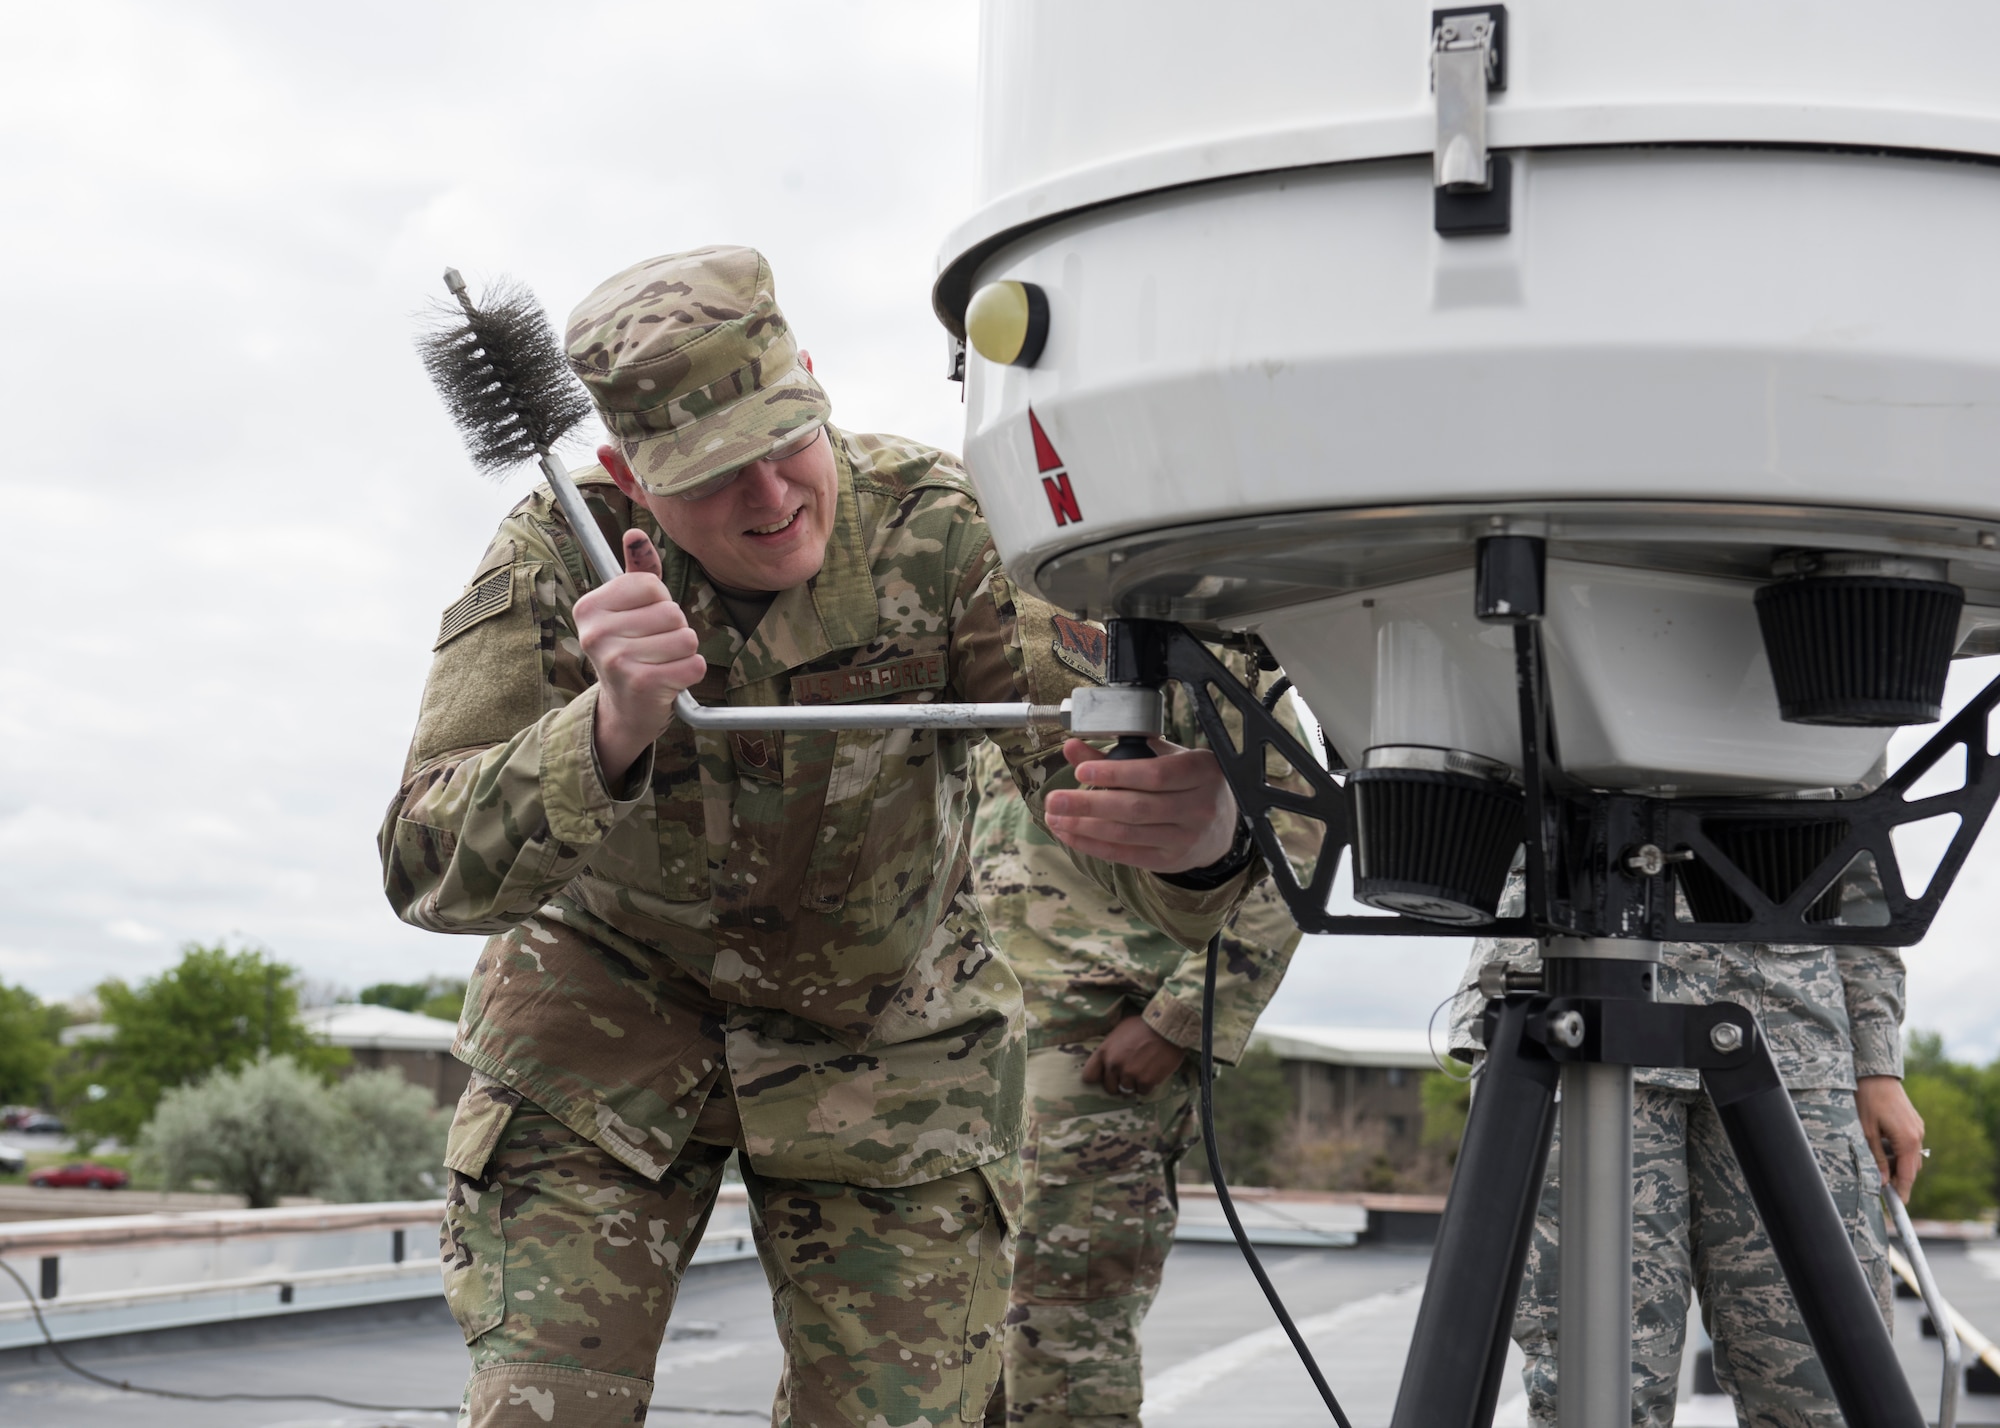 Tech. Sgt. Brandon Knight, 366th Operations Support Squadron weather forecaster, assembles a Portable Doppler Radar May 25, 2019, at Mountain Home Air Force Base, Idaho. The is the first time the Doppler system has been installed on a Continental United States base. (U.S. Air Force photo by Senior Airman Tyrell Hall)